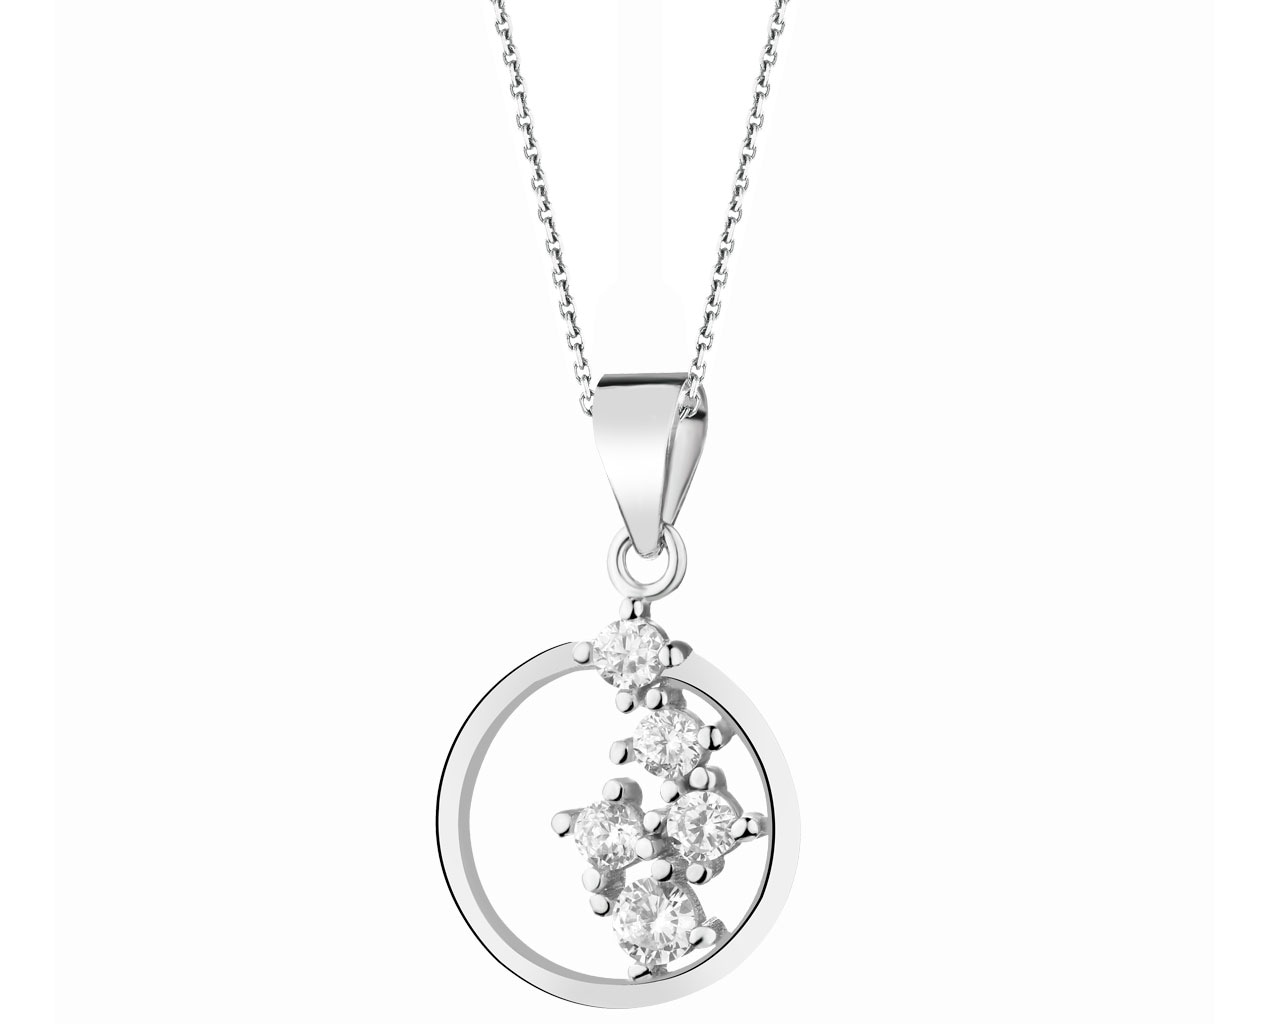 Rhodium Plated Silver Pendant with Cubic Zirconia - Ref No AP530-0242